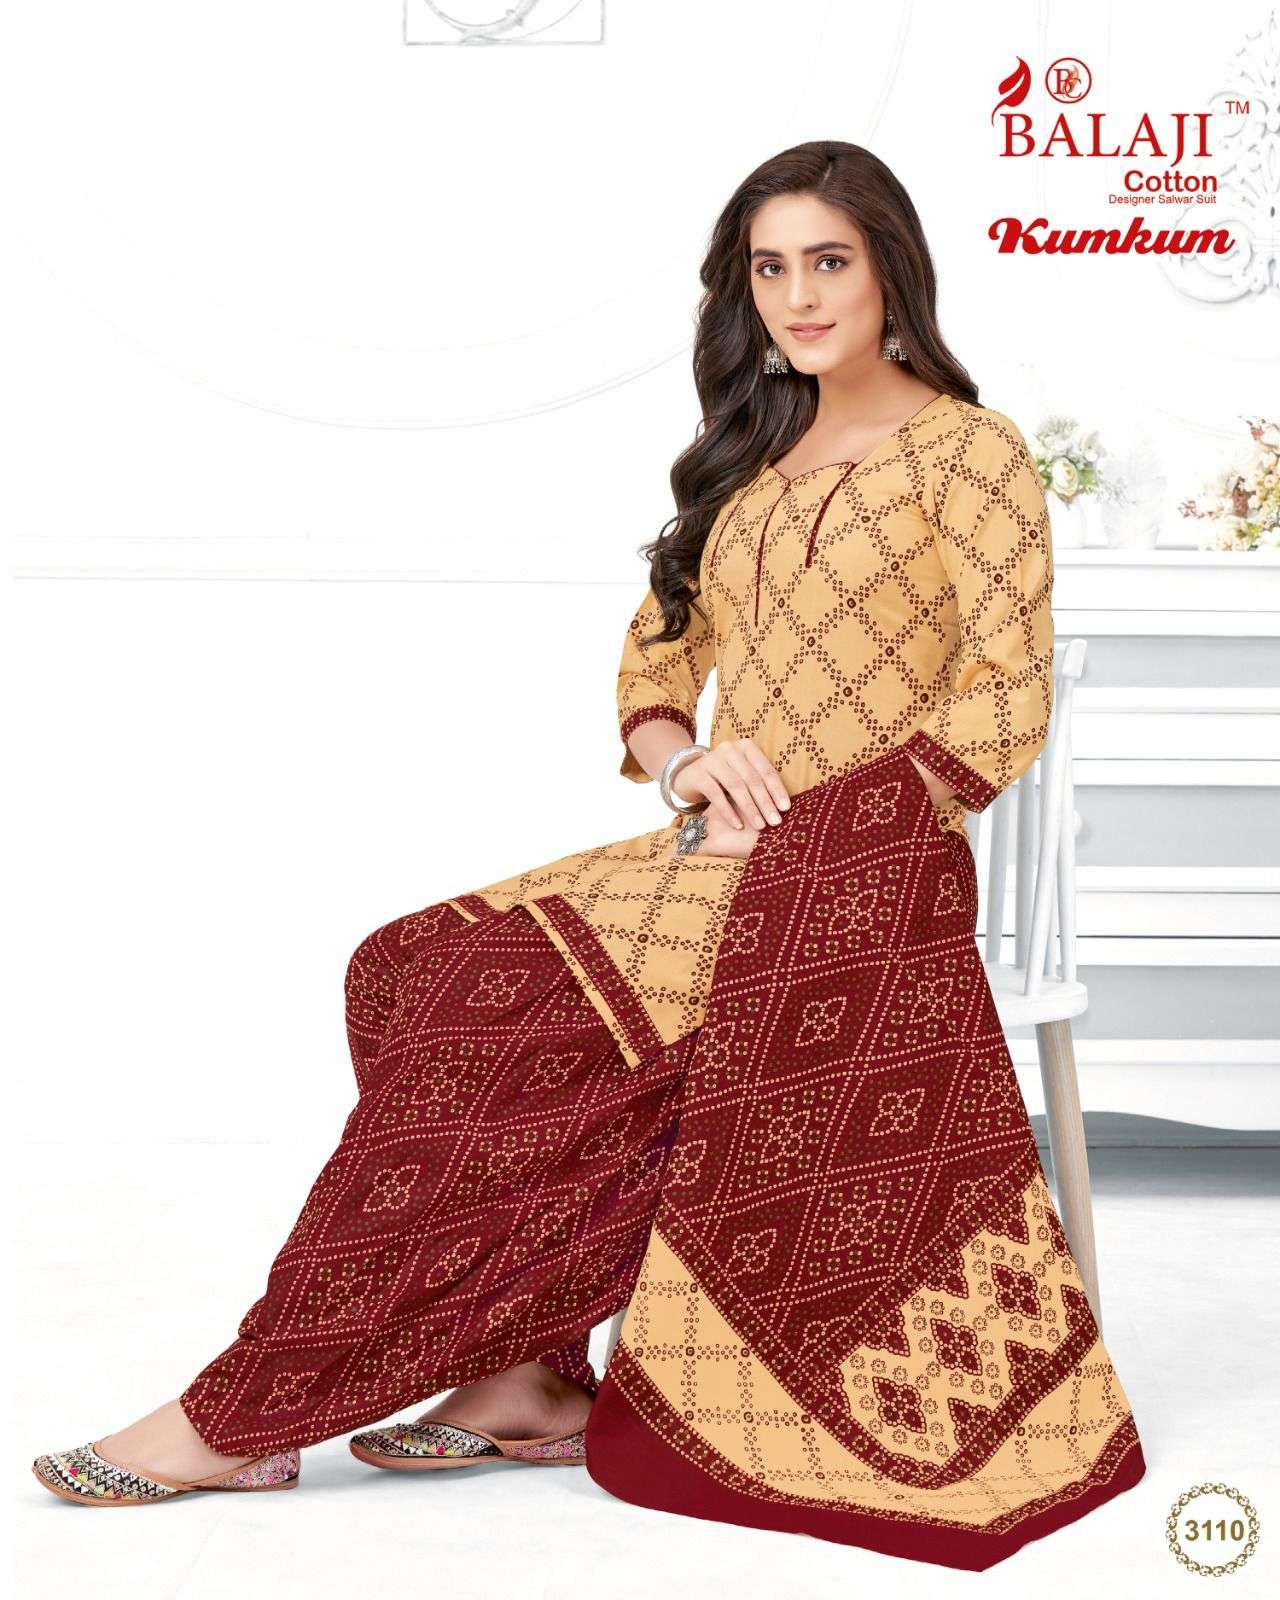 Kumkum Vol-31 By Balaji Cotton 3101 To 3120 Series Beautiful Stylish Festive Suits Fancy Colorful Casual Wear & Ethnic Wear & Ready To Wear Cotton Print Dresses At Wholesale Price